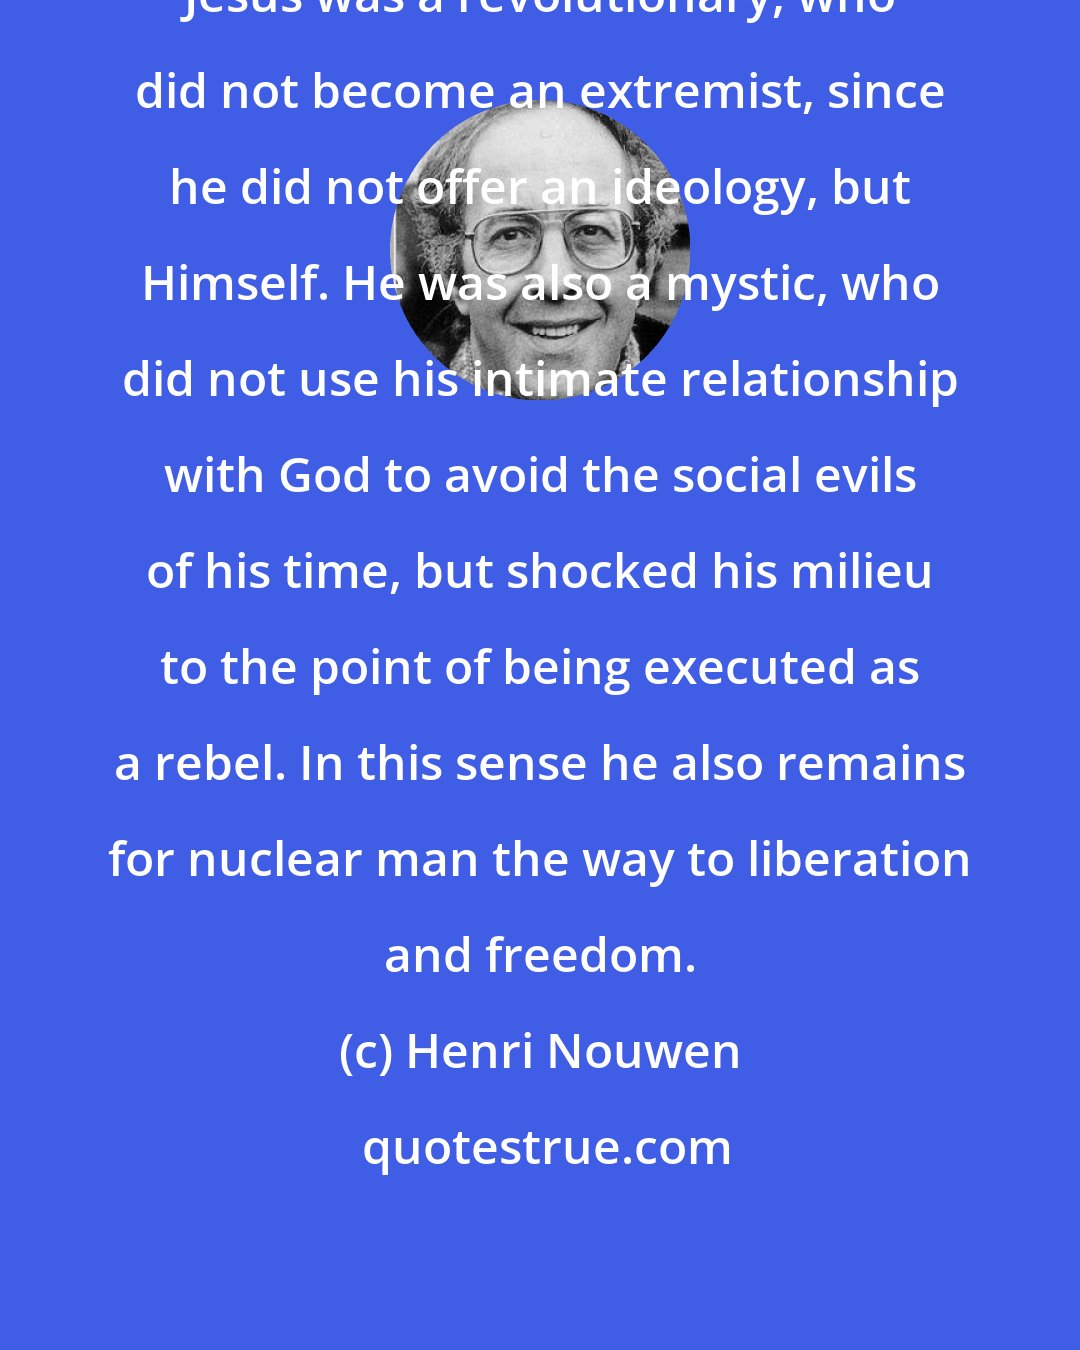 Henri Nouwen: Jesus was a revolutionary, who did not become an extremist, since he did not offer an ideology, but Himself. He was also a mystic, who did not use his intimate relationship with God to avoid the social evils of his time, but shocked his milieu to the point of being executed as a rebel. In this sense he also remains for nuclear man the way to liberation and freedom.